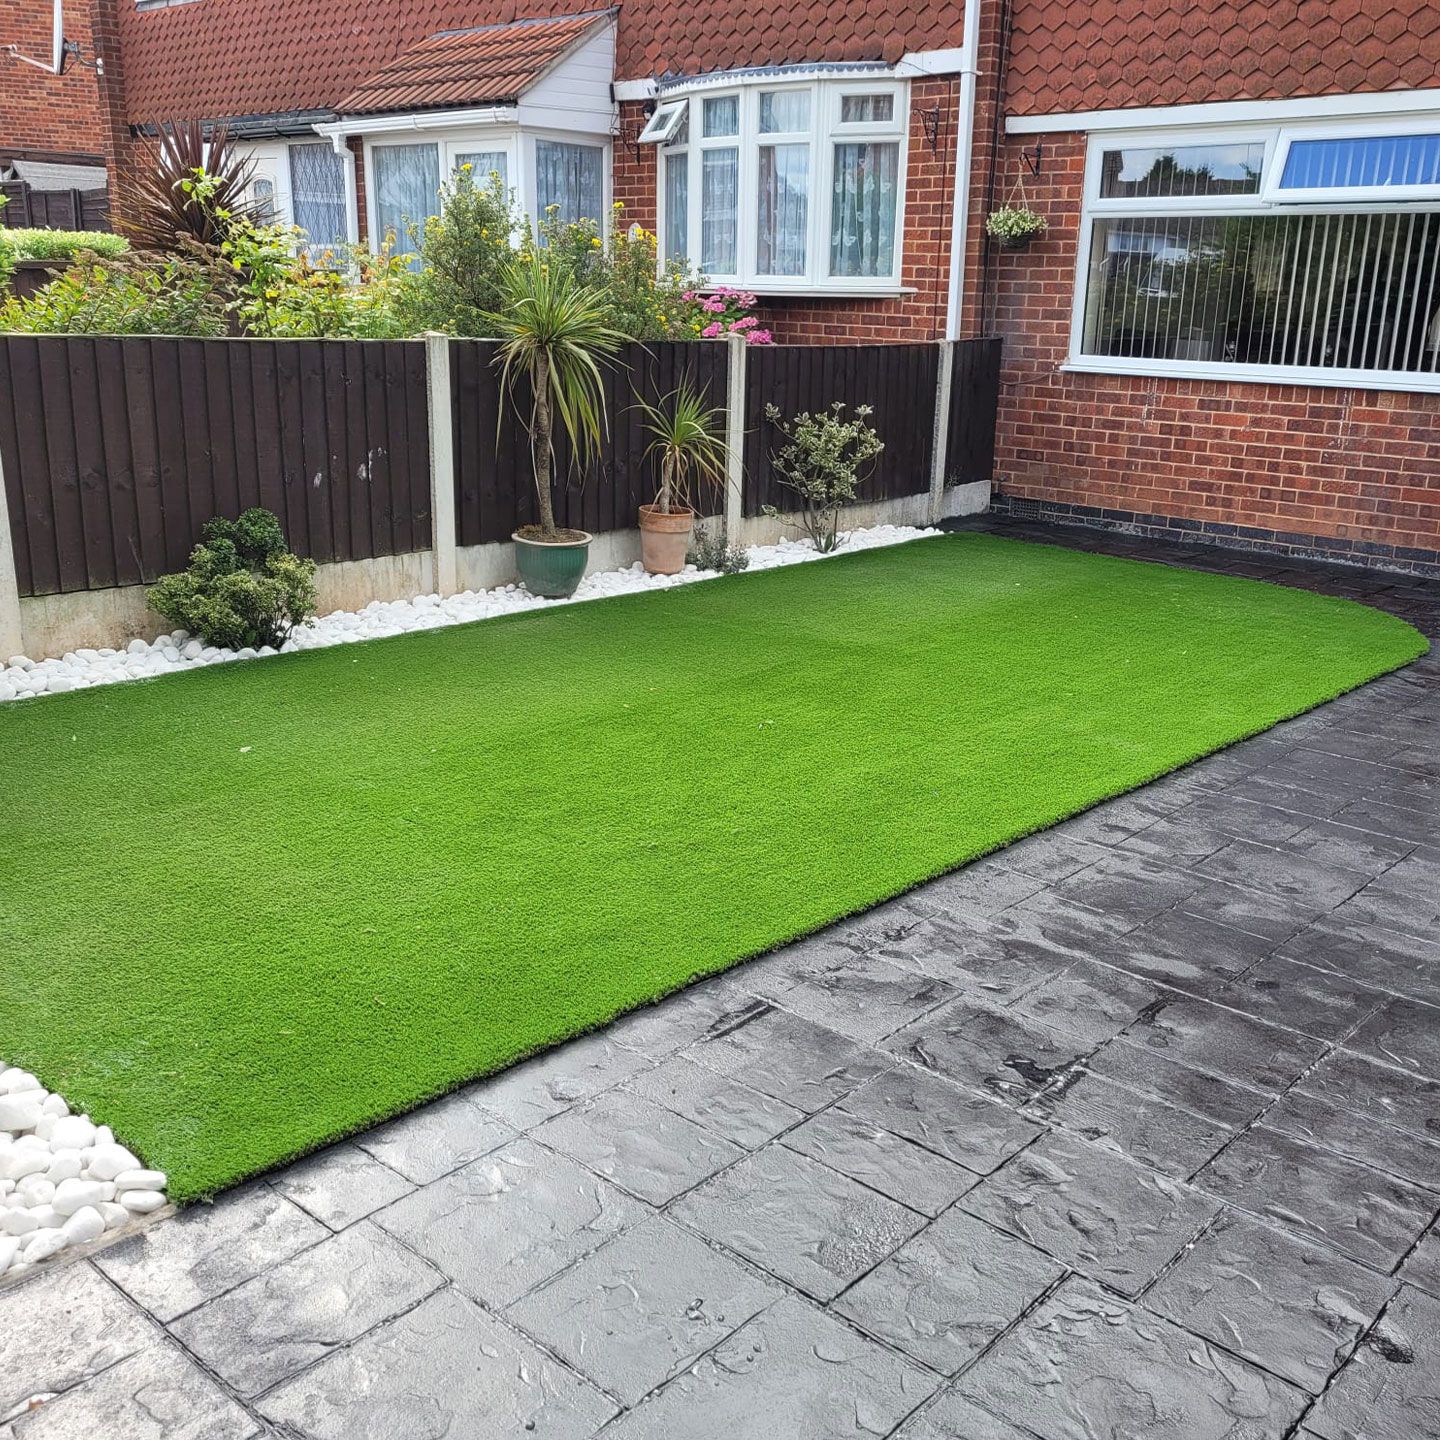 landscaping in Nuneaton showing new artificial grass and patterned concrete paving